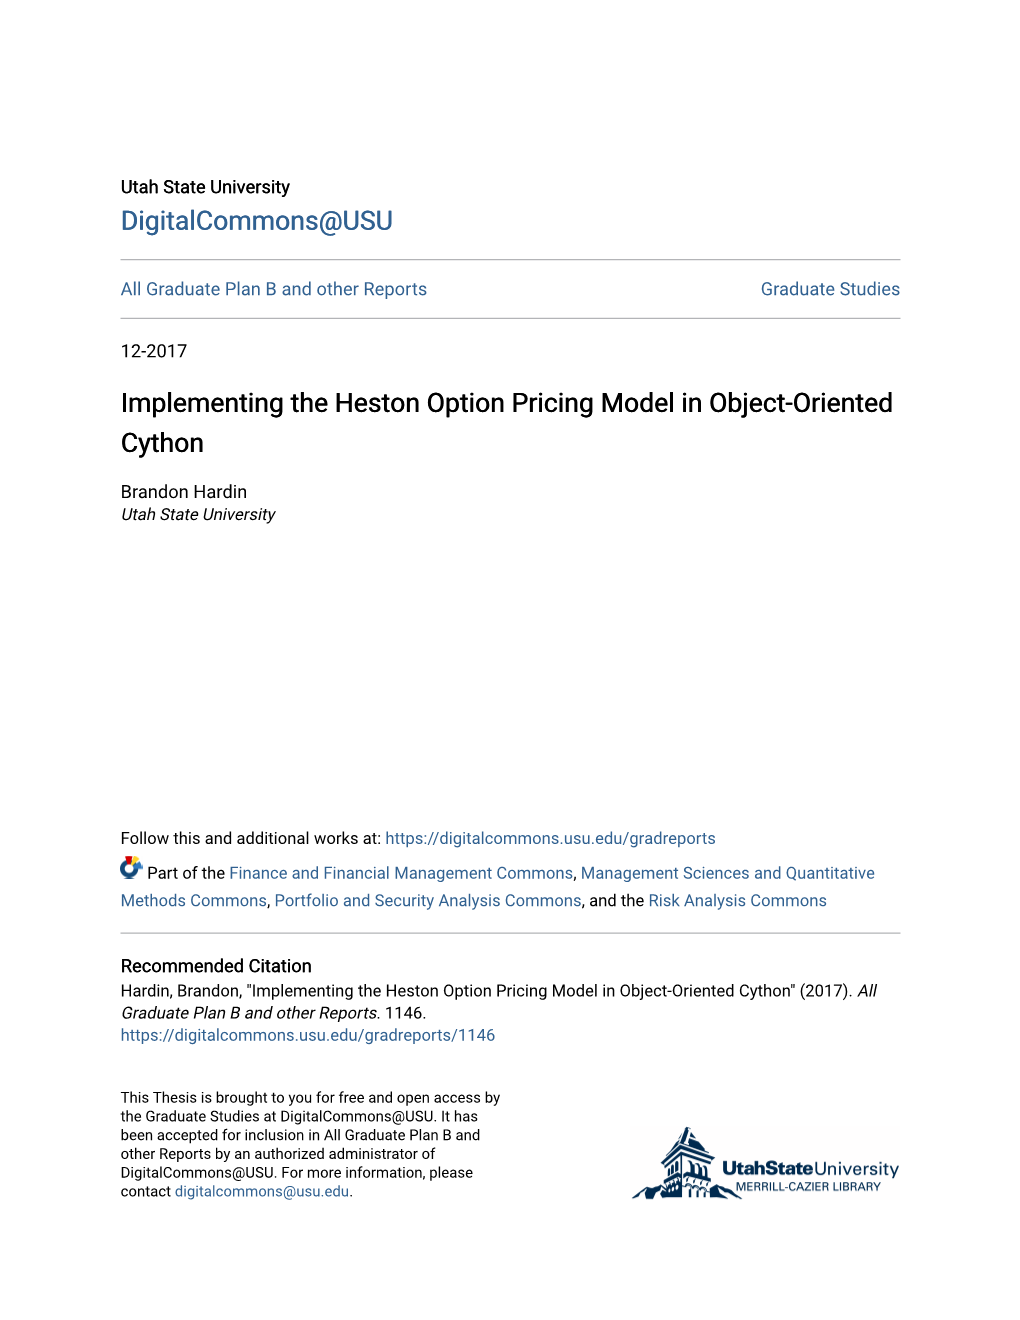 Implementing the Heston Option Pricing Model in Object-Oriented Cython